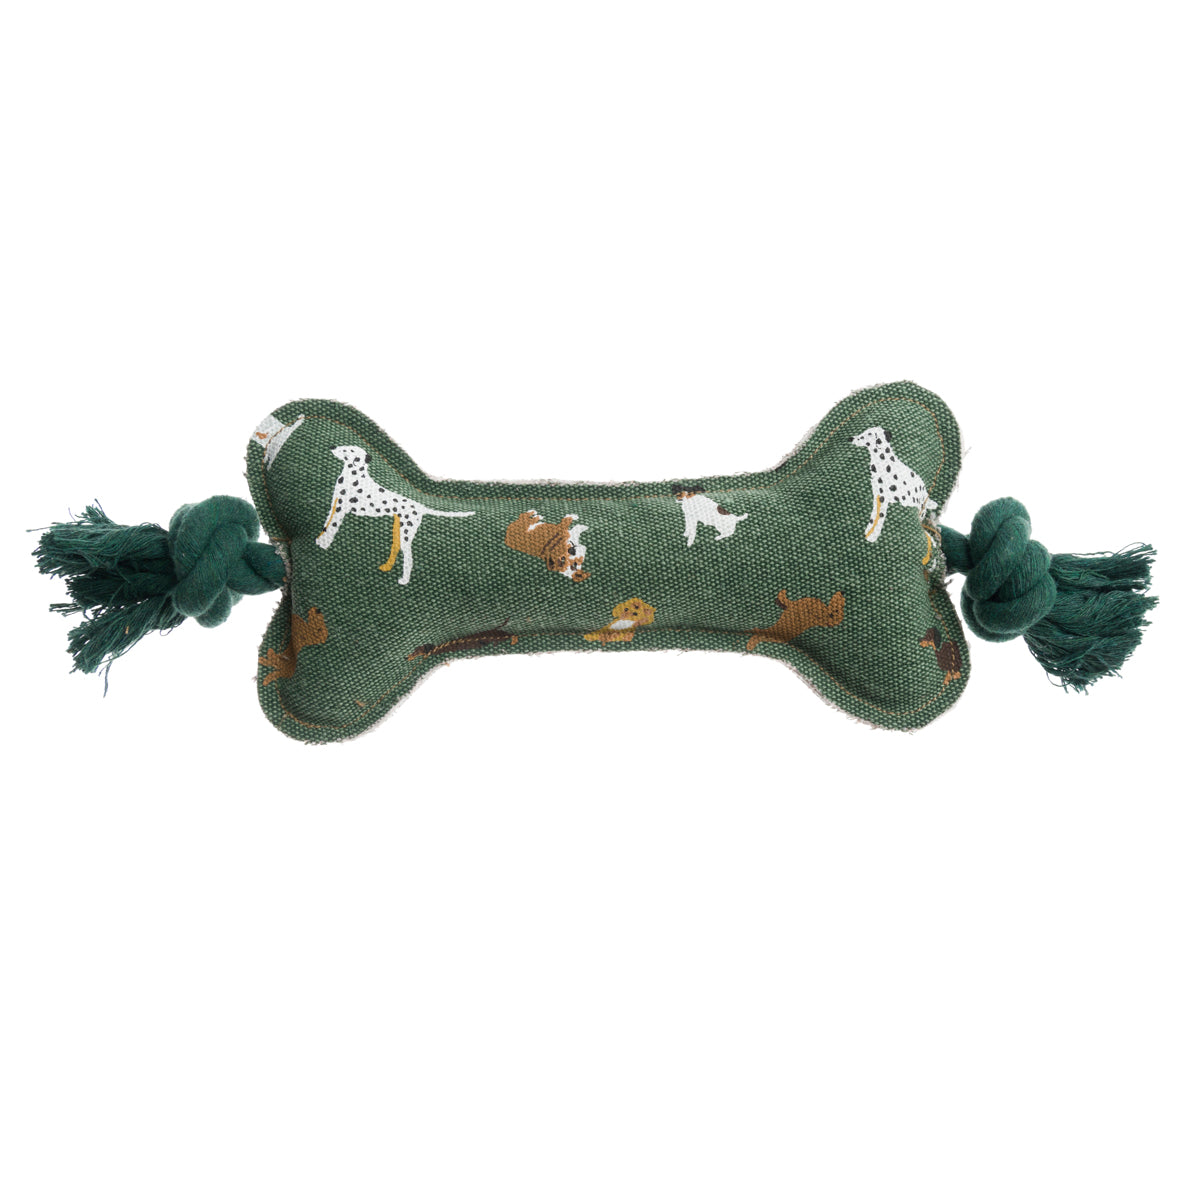 Fetch Dog Toy by Sophie Allport